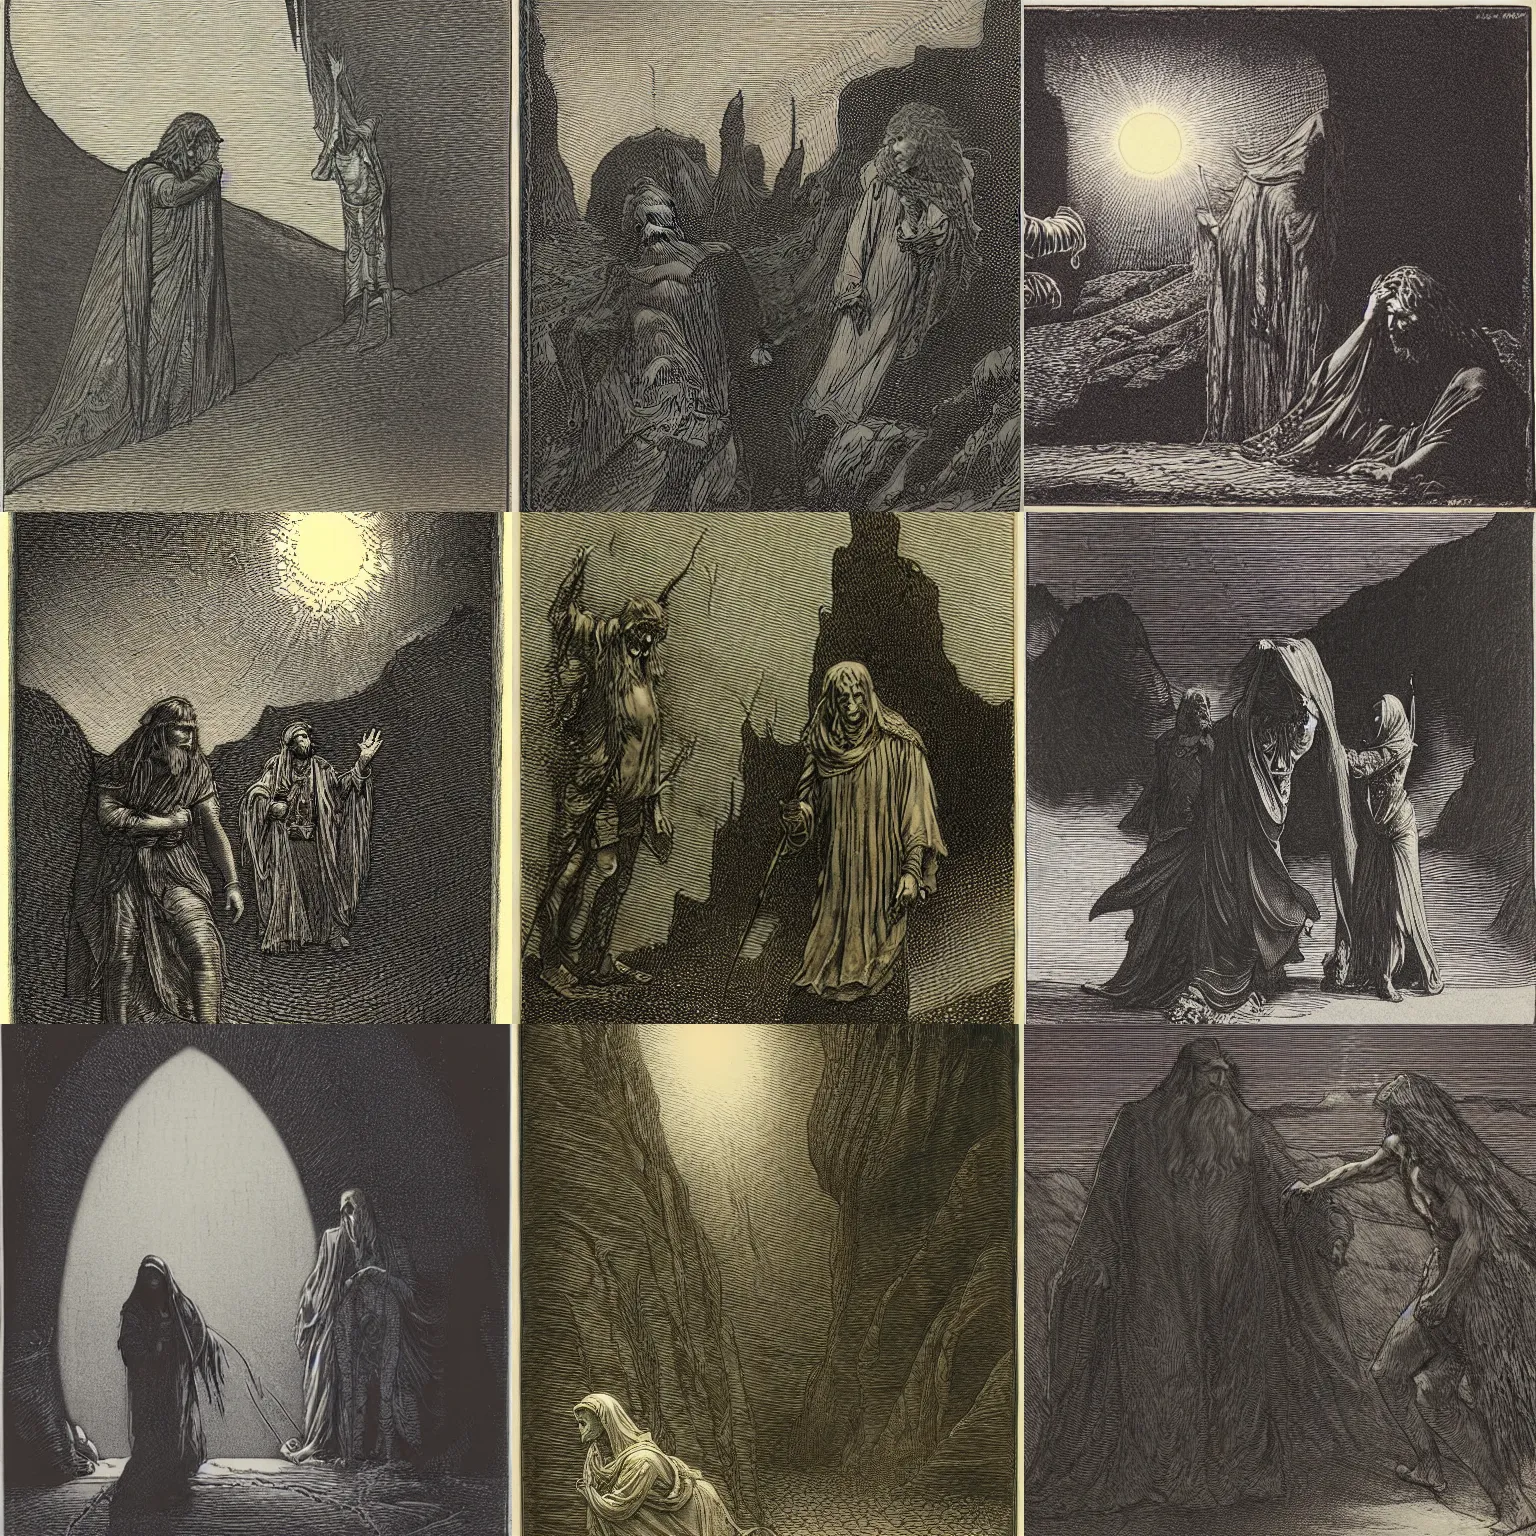 Prompt: etching by Franklin Booth and Gustav Doré showing frightened sorcerer in the desert by night